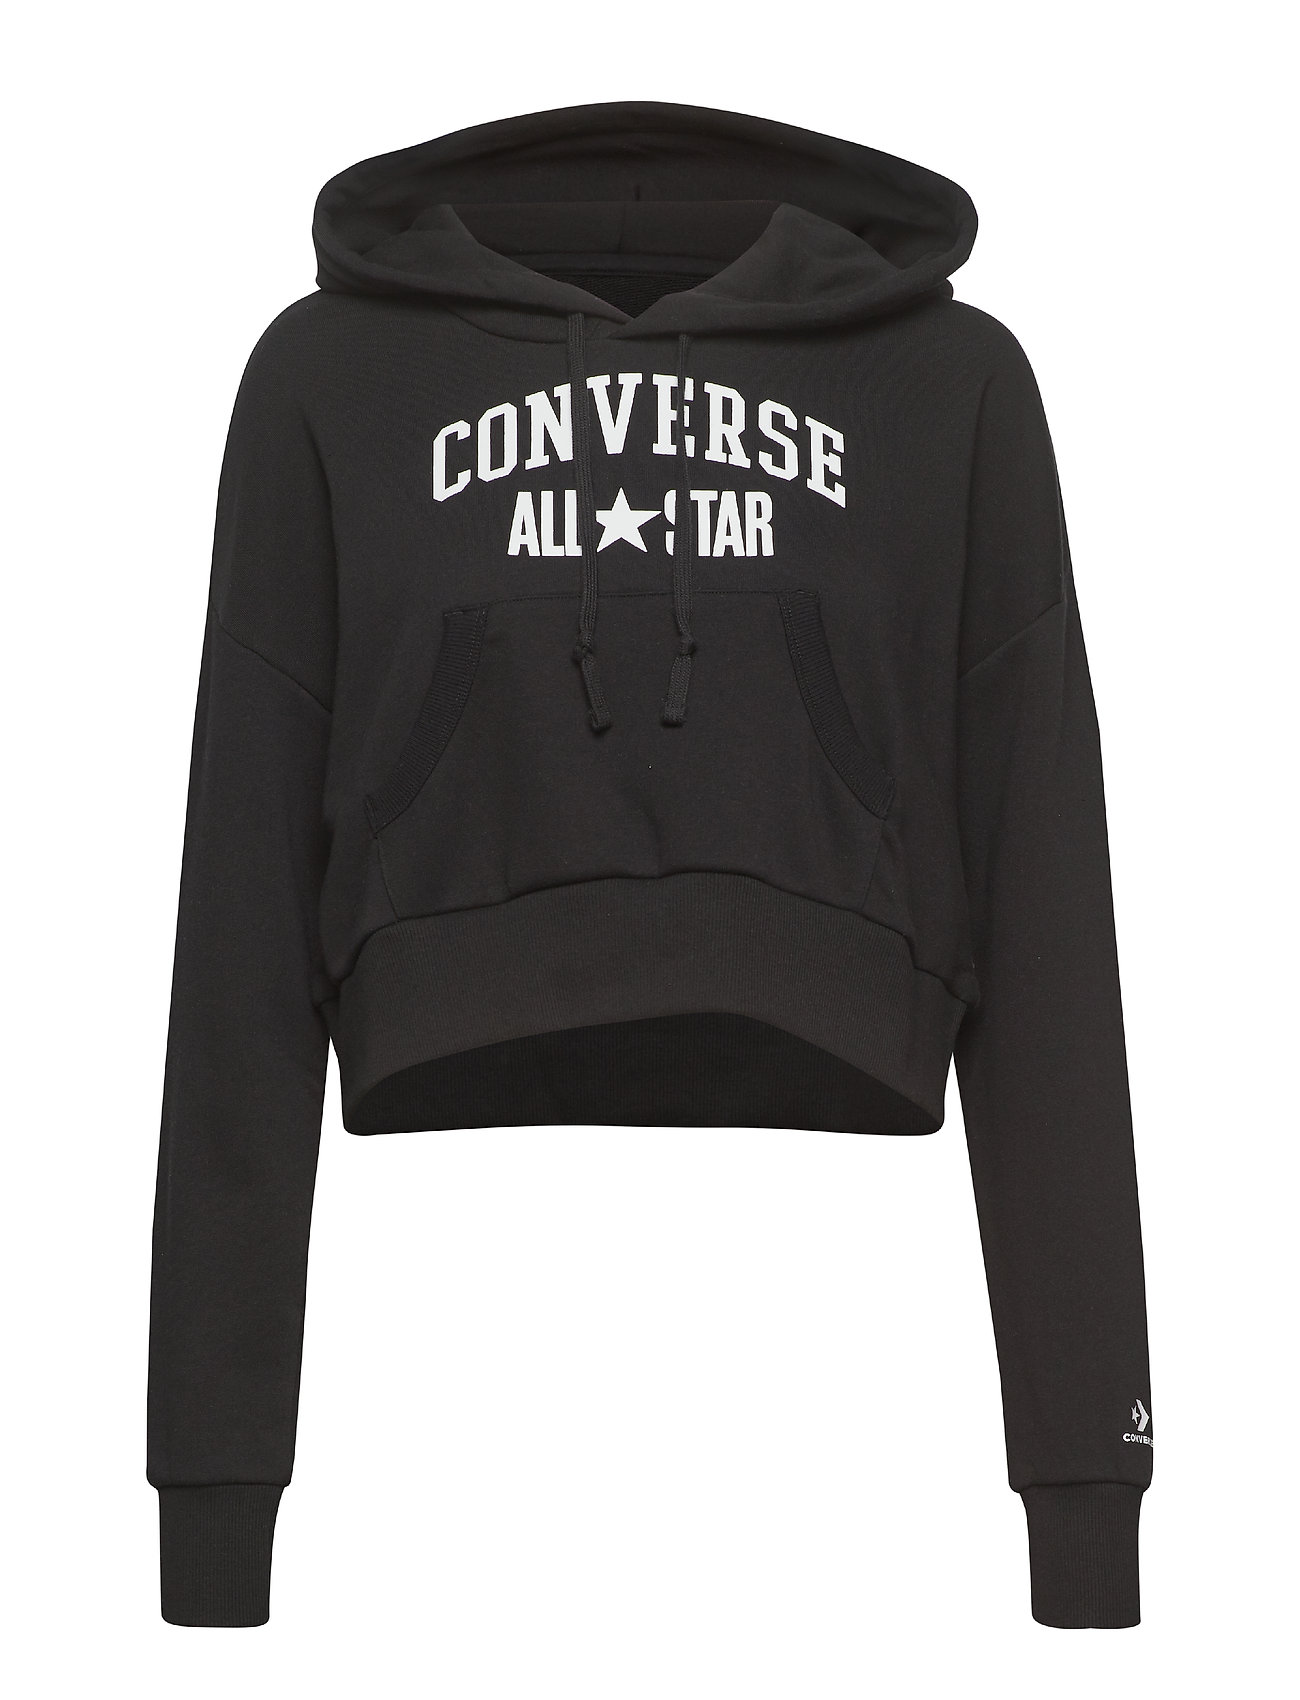 Converse Converse All Star Pullover Hoodie (Black), (36 €) | Large  selection of outlet-styles | Booztlet.com